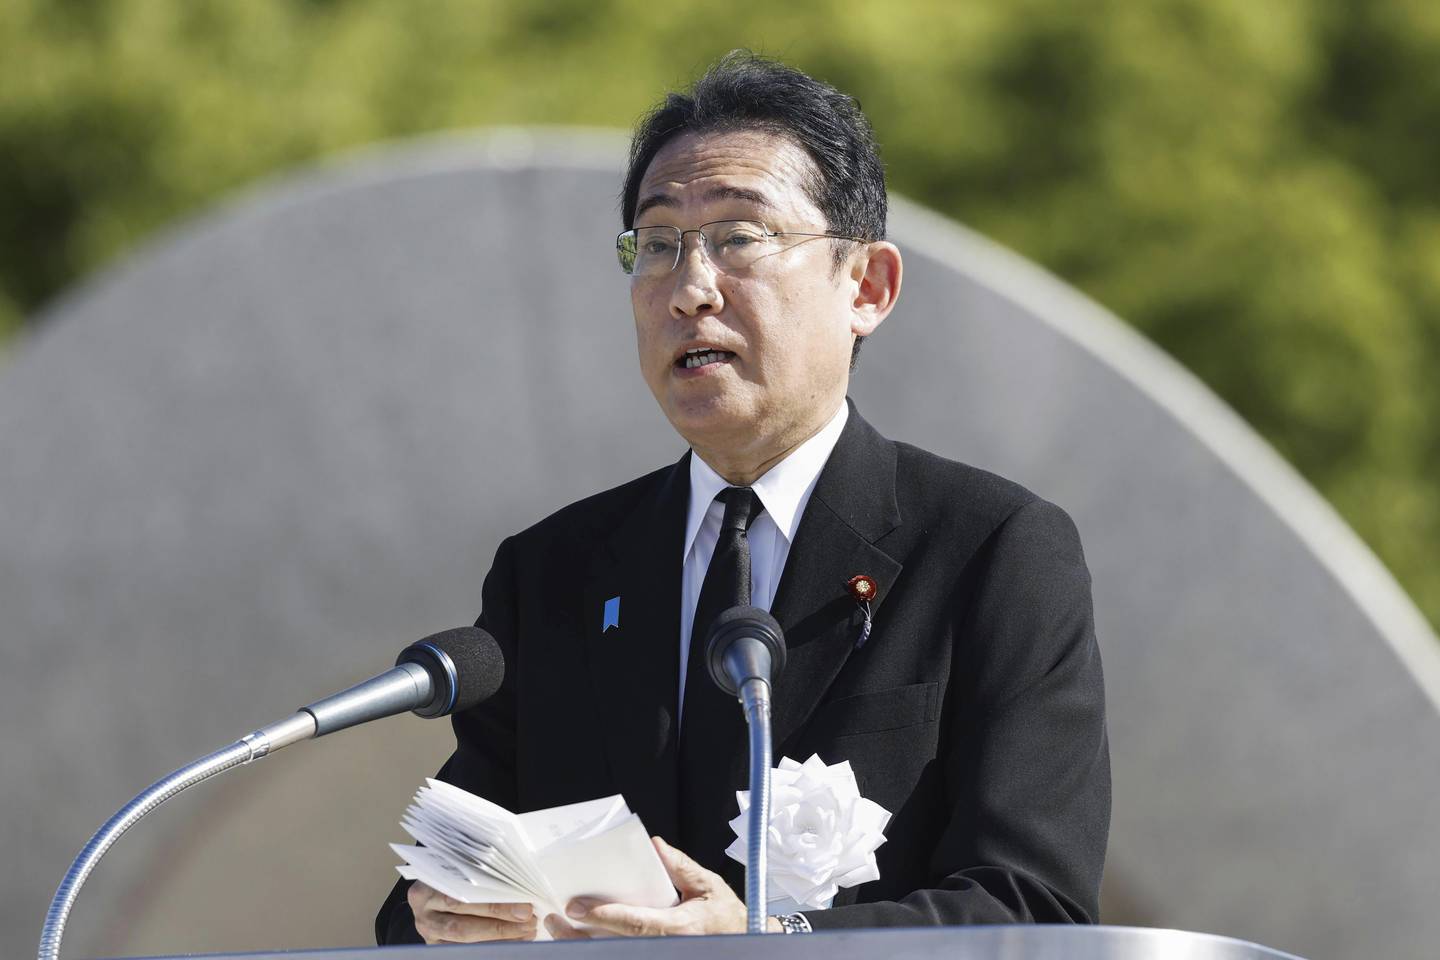 Japan's Prime Minister Fumio Kishida delivers a speech during a ceremony marking the 78th anniversary of the world's first atomic bombing at the Hiroshima Peace Memorial Park in Hiroshima, western Japan Sunday, Aug. 6, 2023.